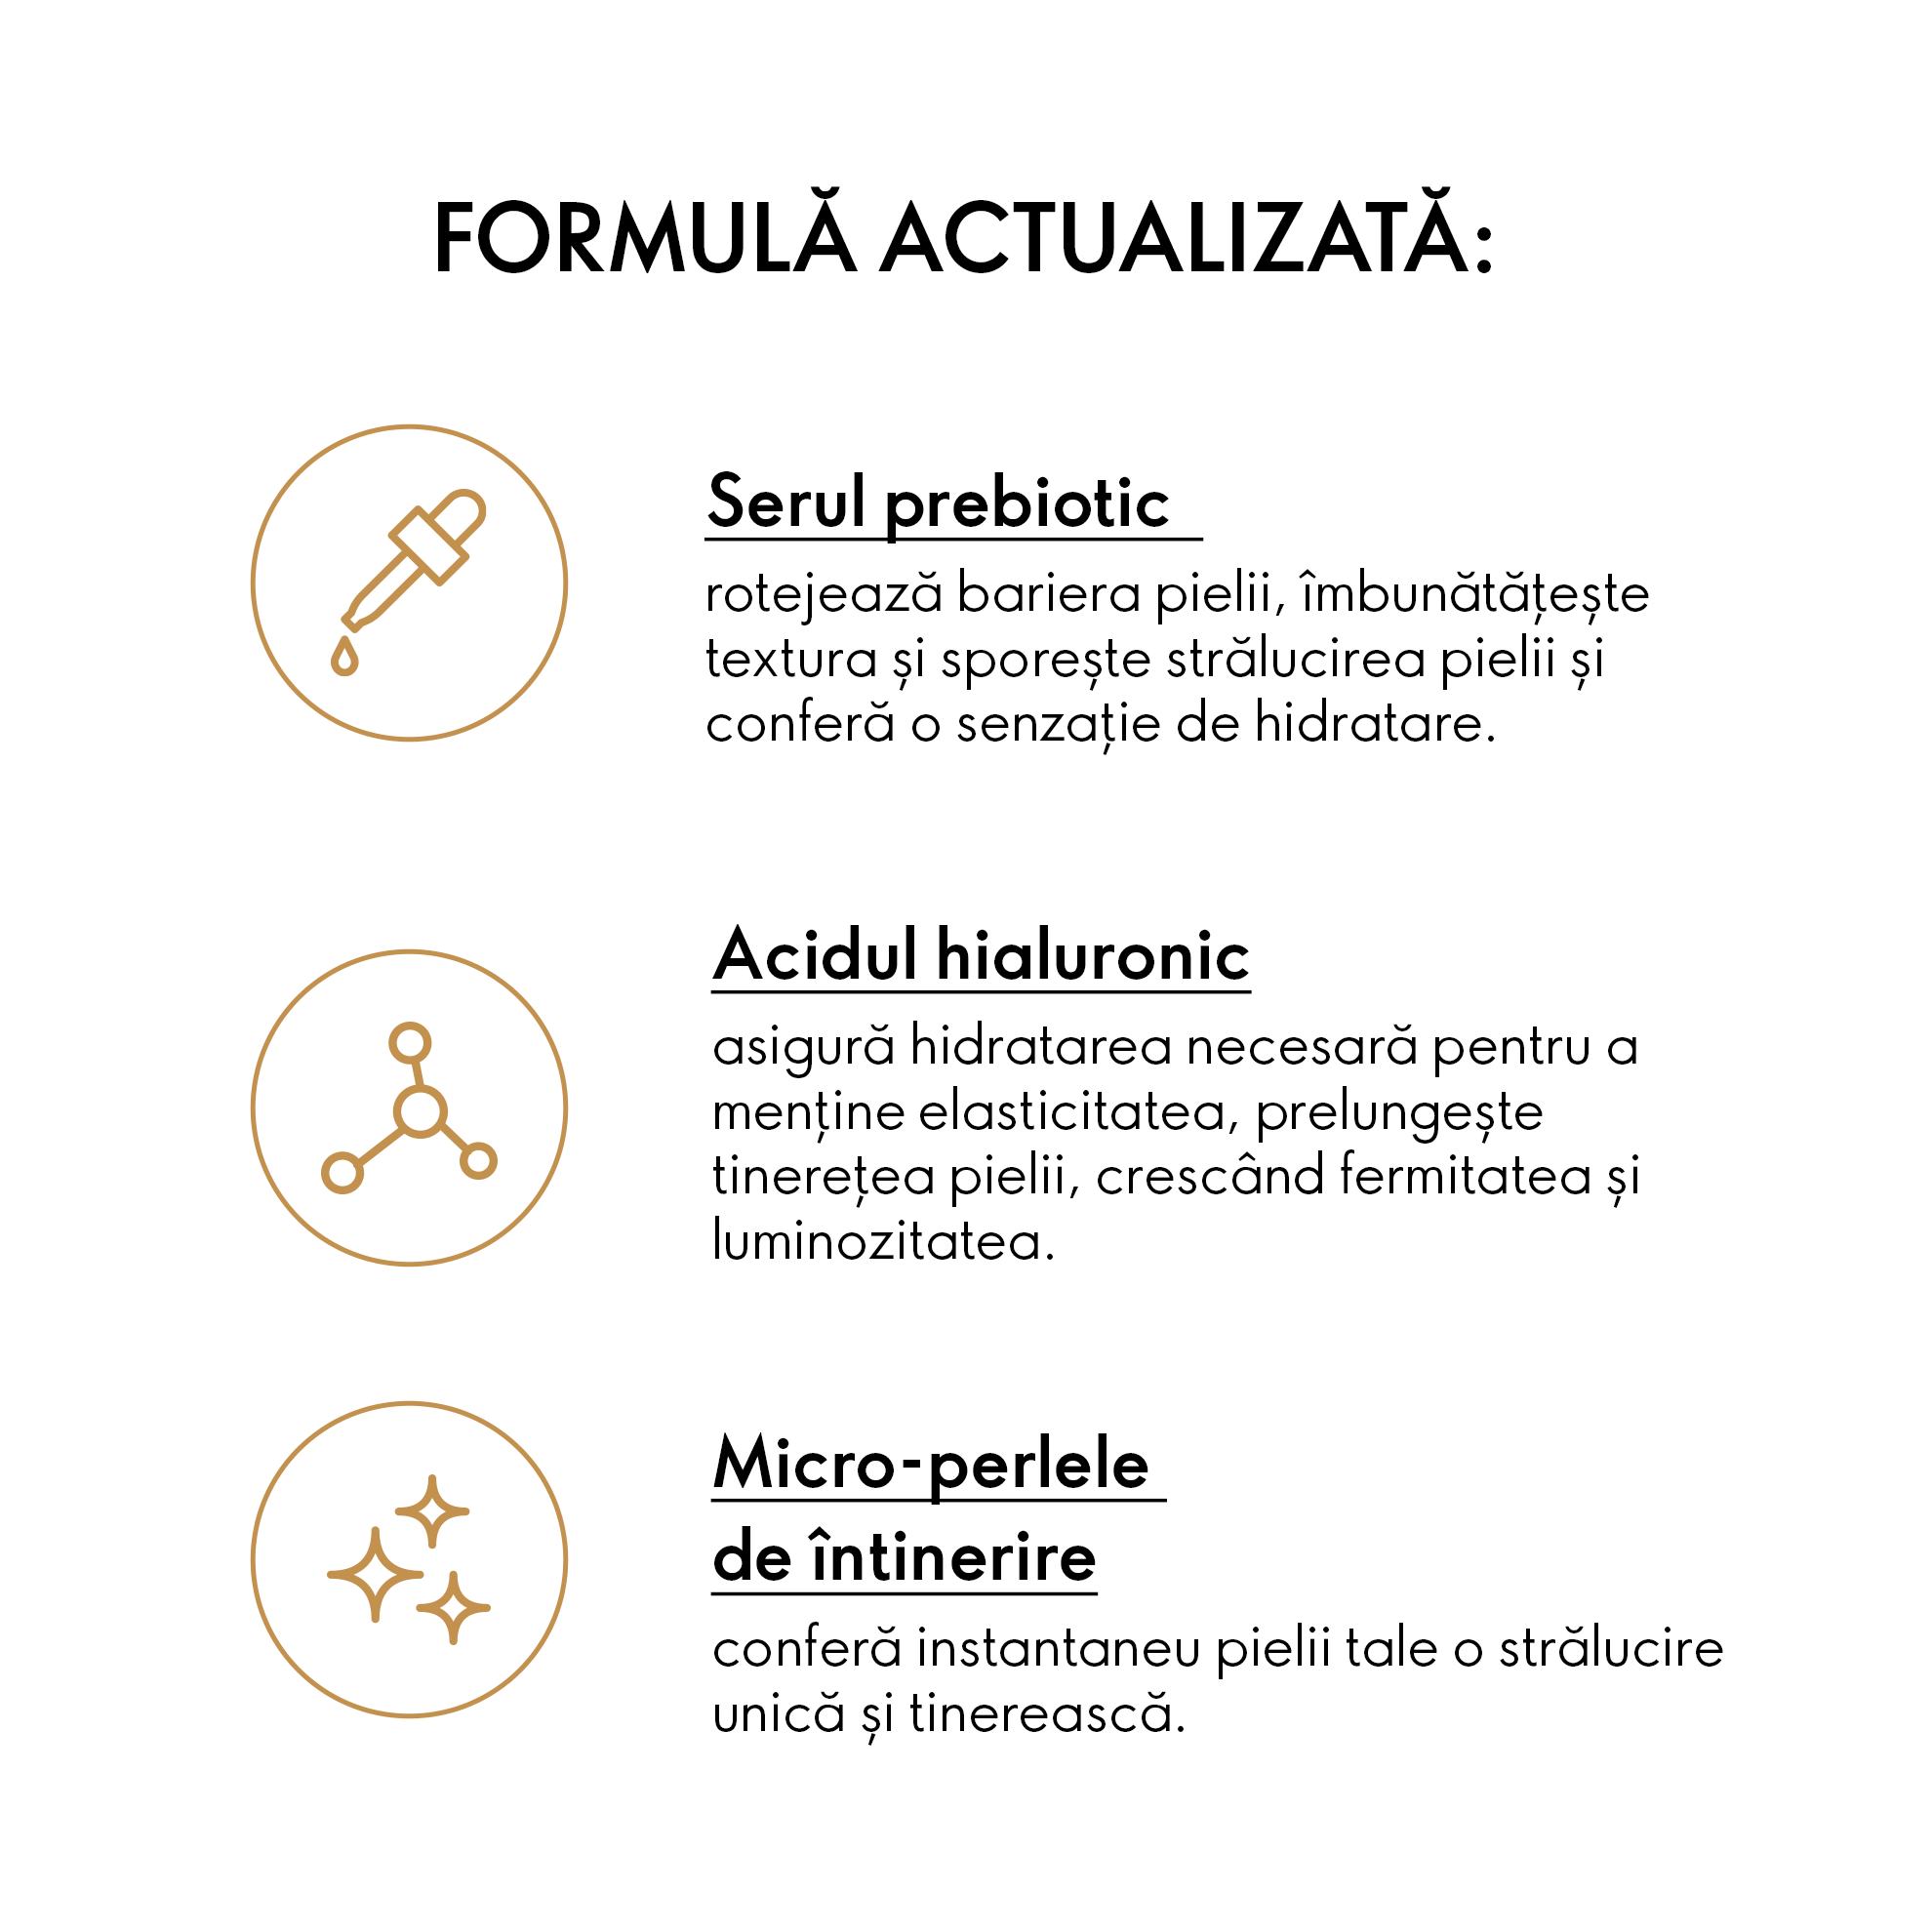 https://media-cdn.oriflame.com/productImage?externalMediaId=product-management-media%2fProducts%2f42118%2fMD%2f42118_7.png&id=17353358&version=2